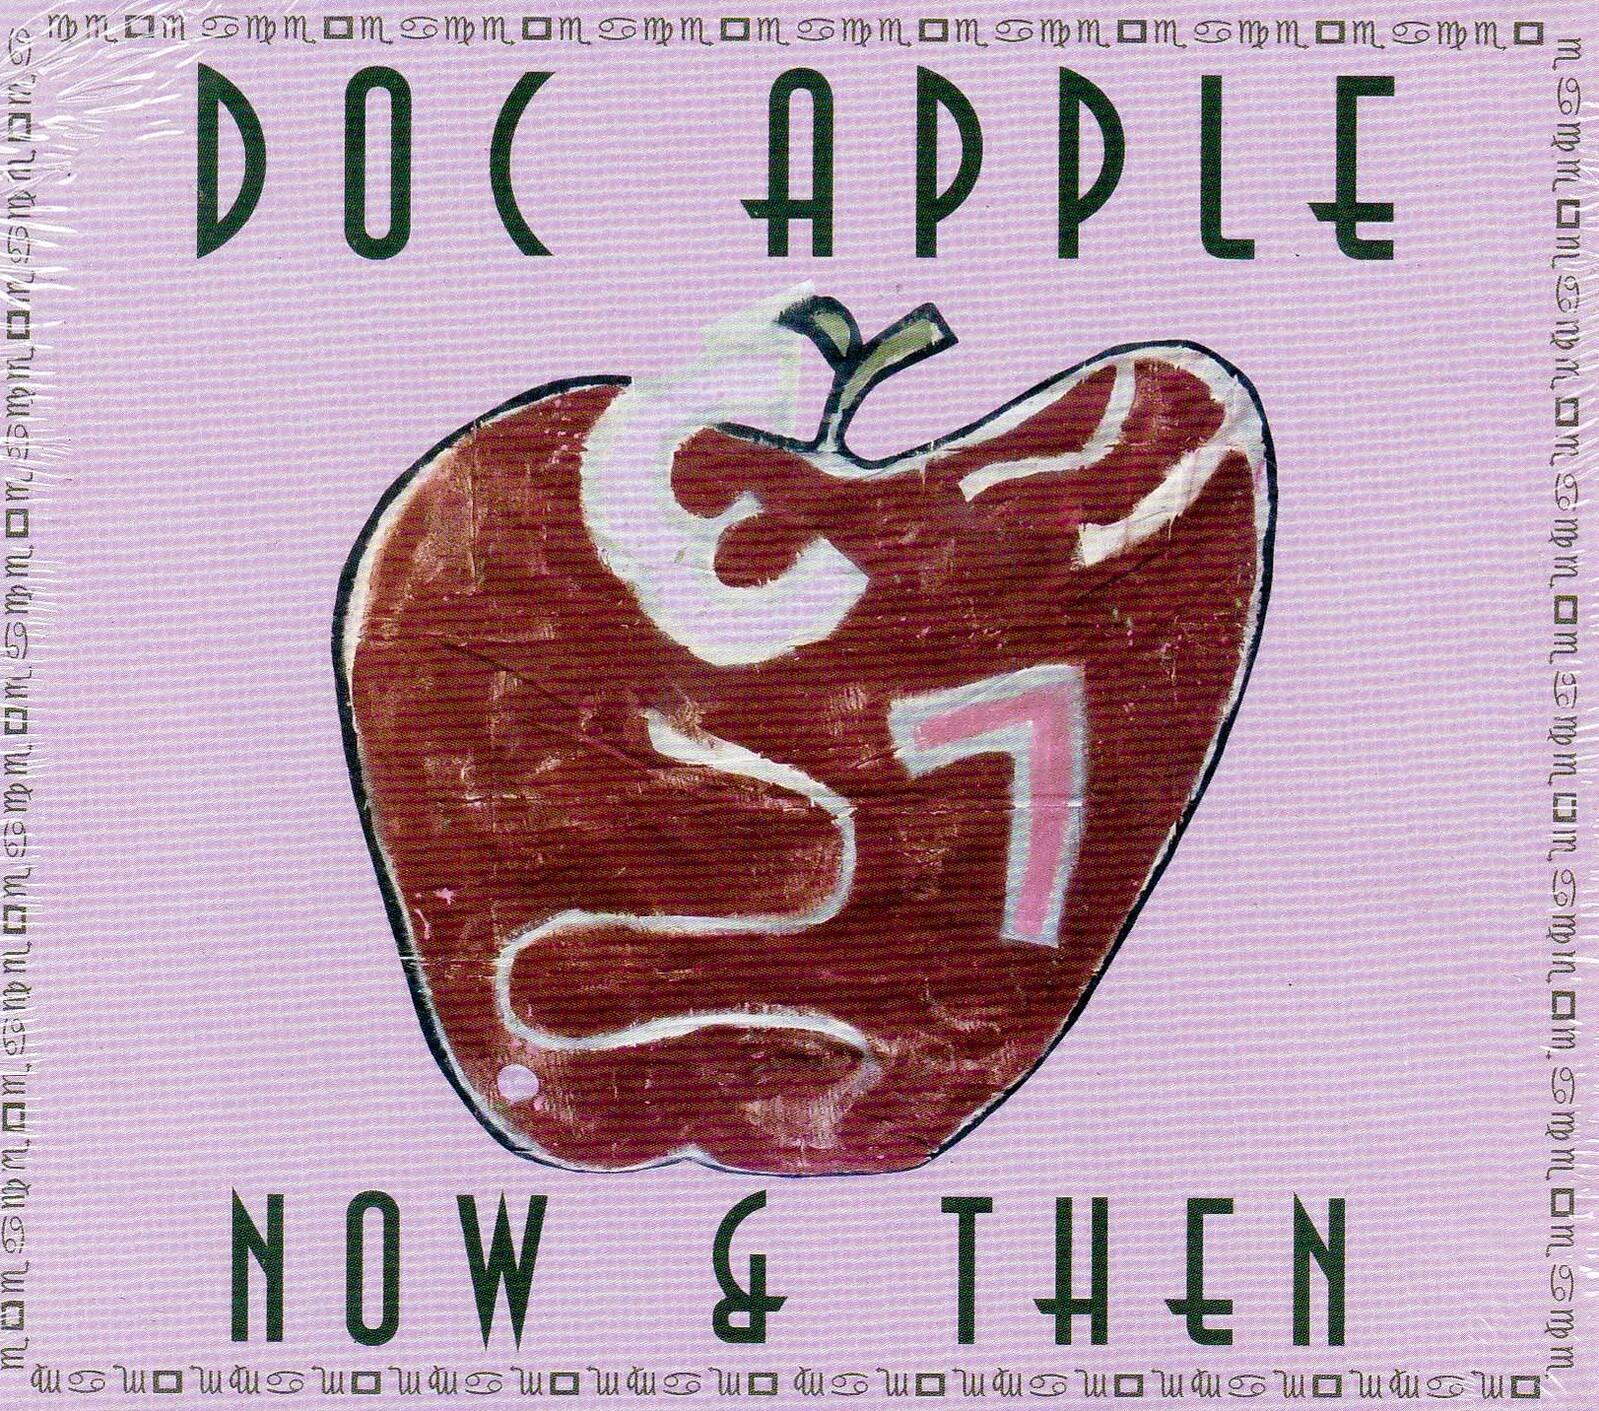 Now & Then -Doc Apple CD